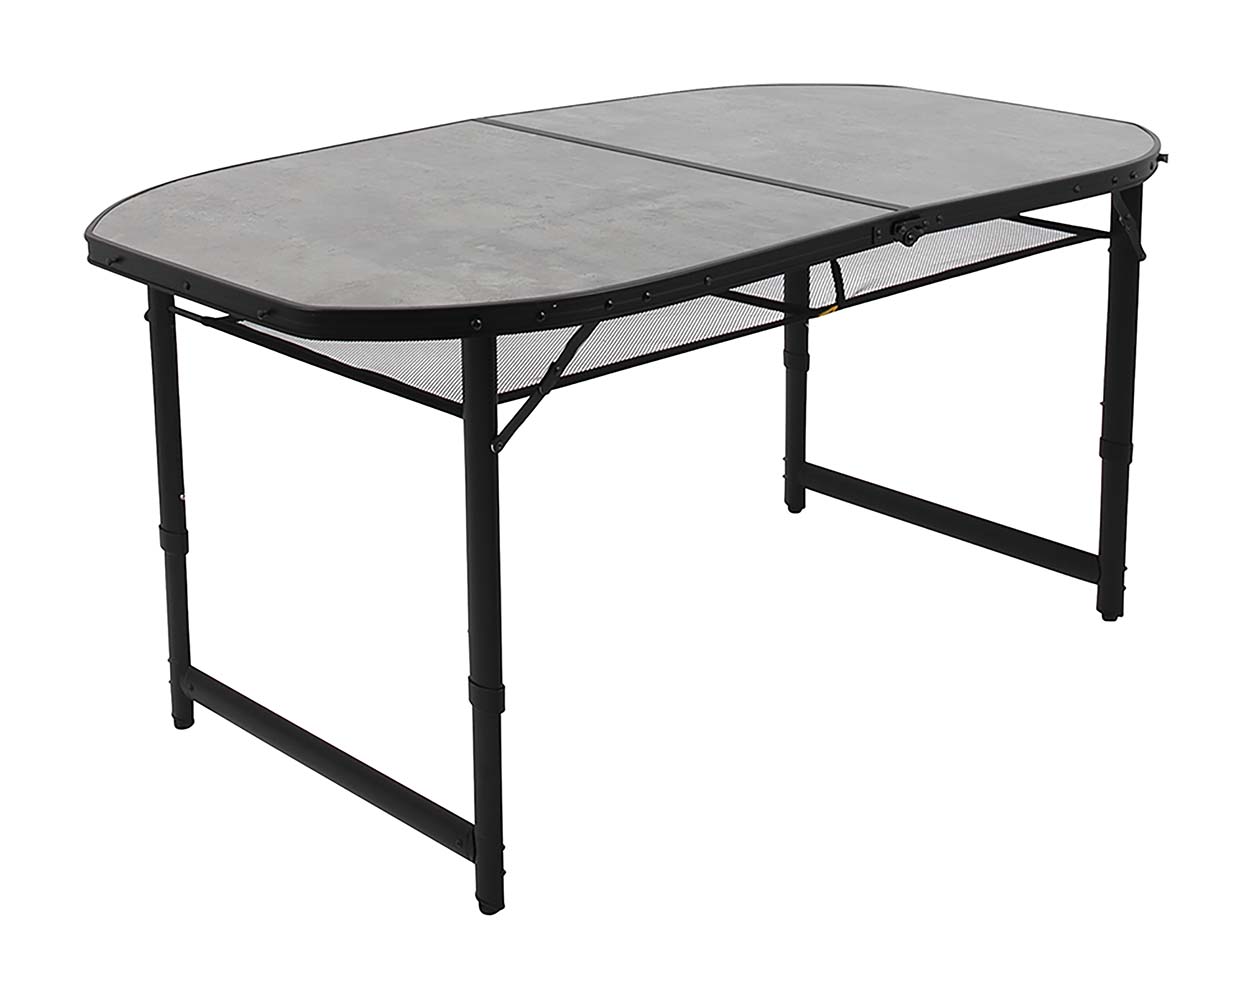 1404188 Bo-Camp - Industrial collection - Tafel - Northgate - Ovaal - Koffermodel - 150x80 cm